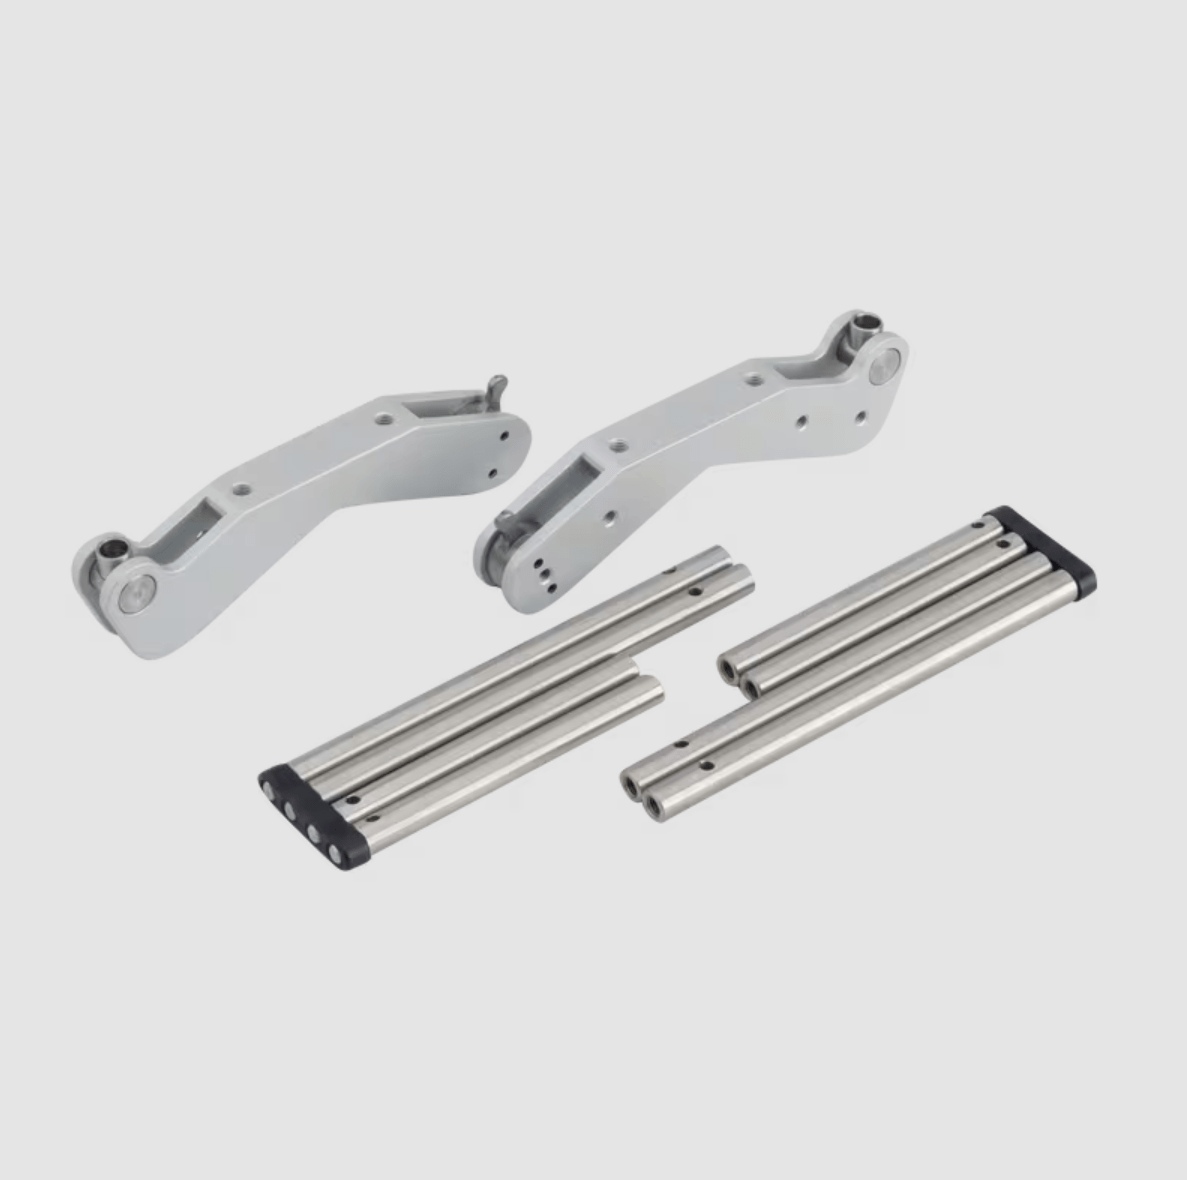 SKF TKSA 11-EBK SKF, Extendable brackets (2x) with 2x 120 mm and 2x 80 mm threaded rods (no chains) - Apollo Industries llc